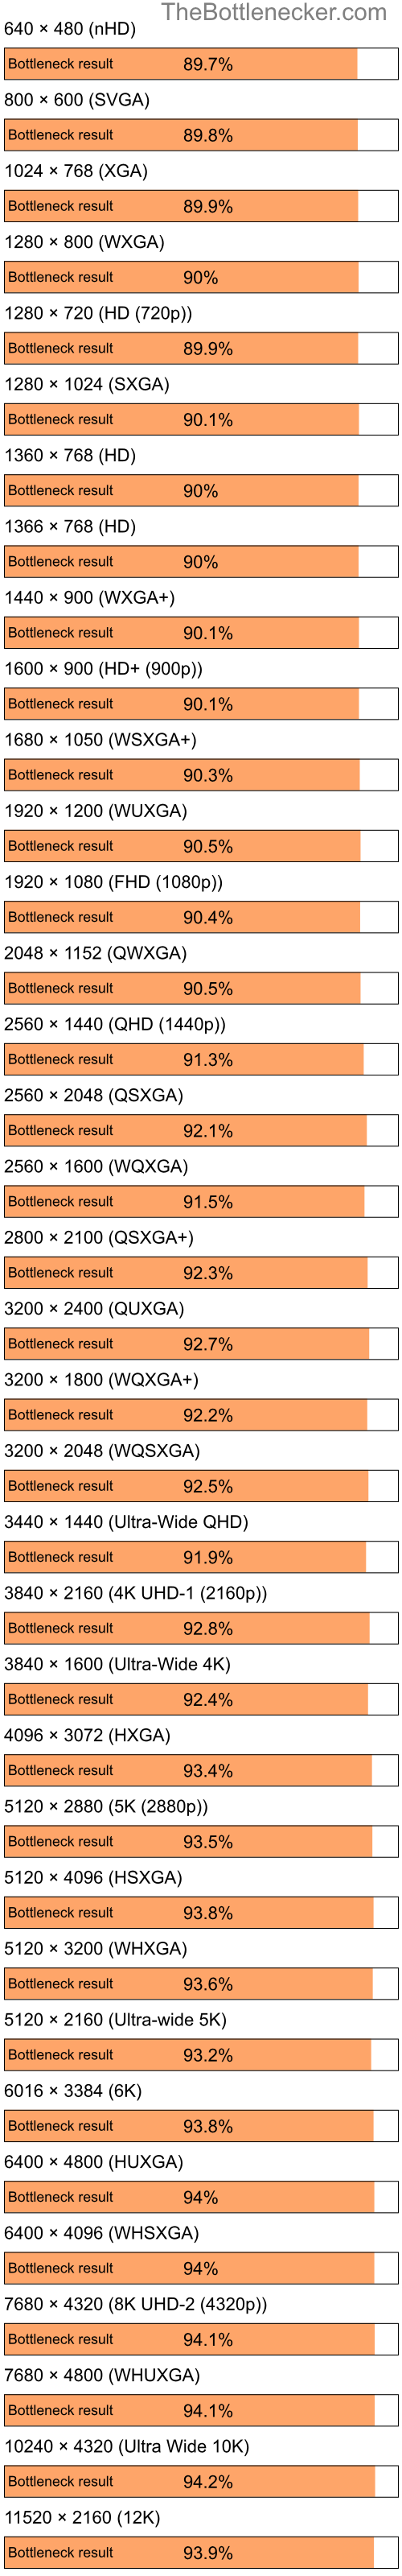 Bottleneck results by resolution for Intel Celeron and NVIDIA GeForce FX Go 5200 in Graphic Card Intense Tasks